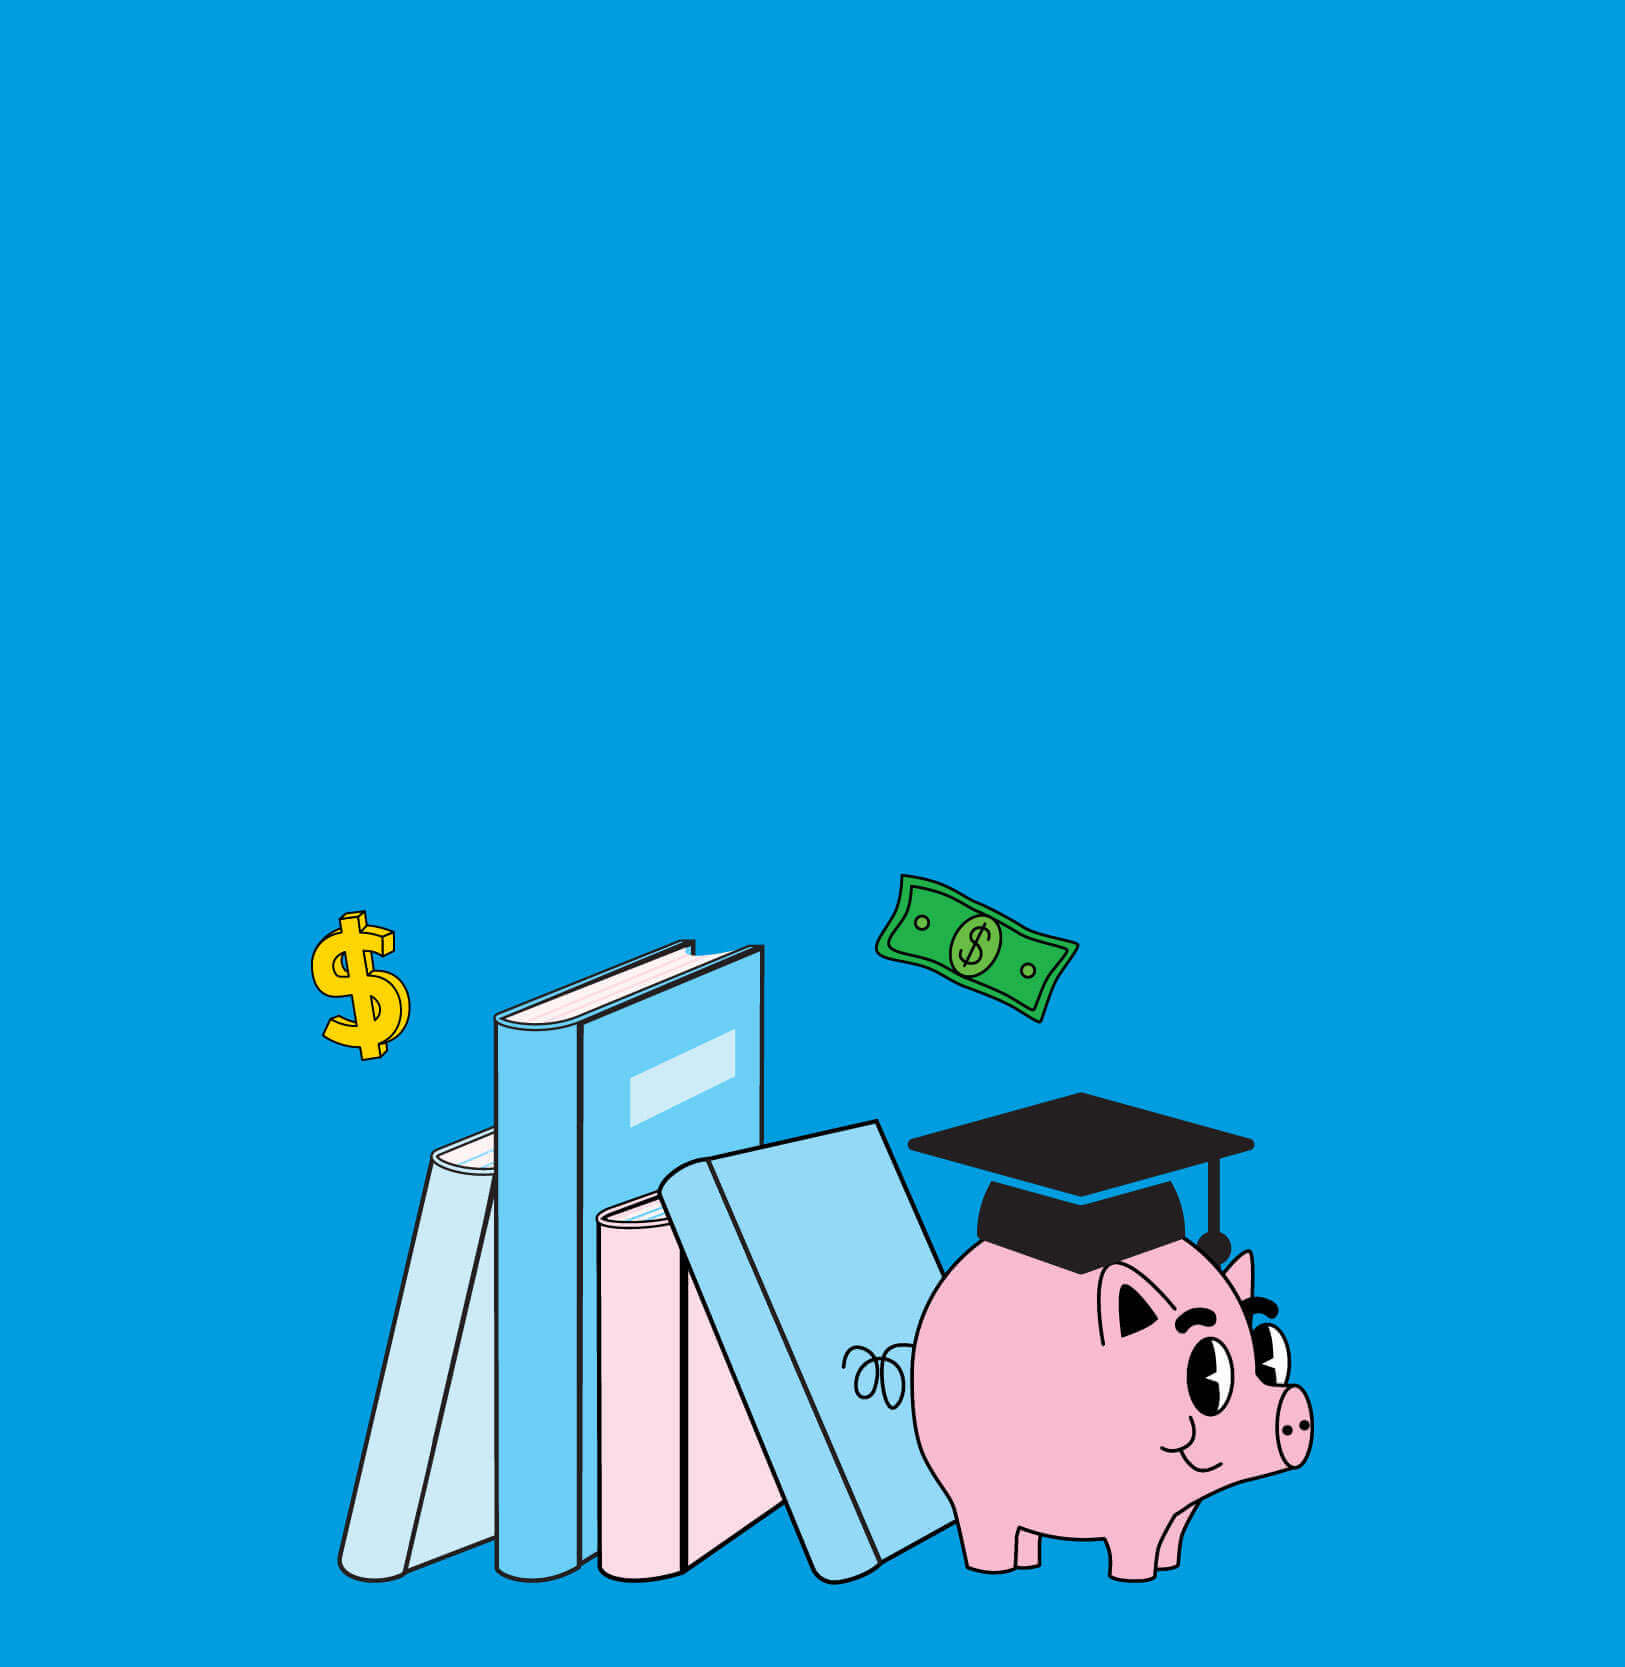 Piggy bank wearing a graduation cap and smiling next to a stack of academic books.